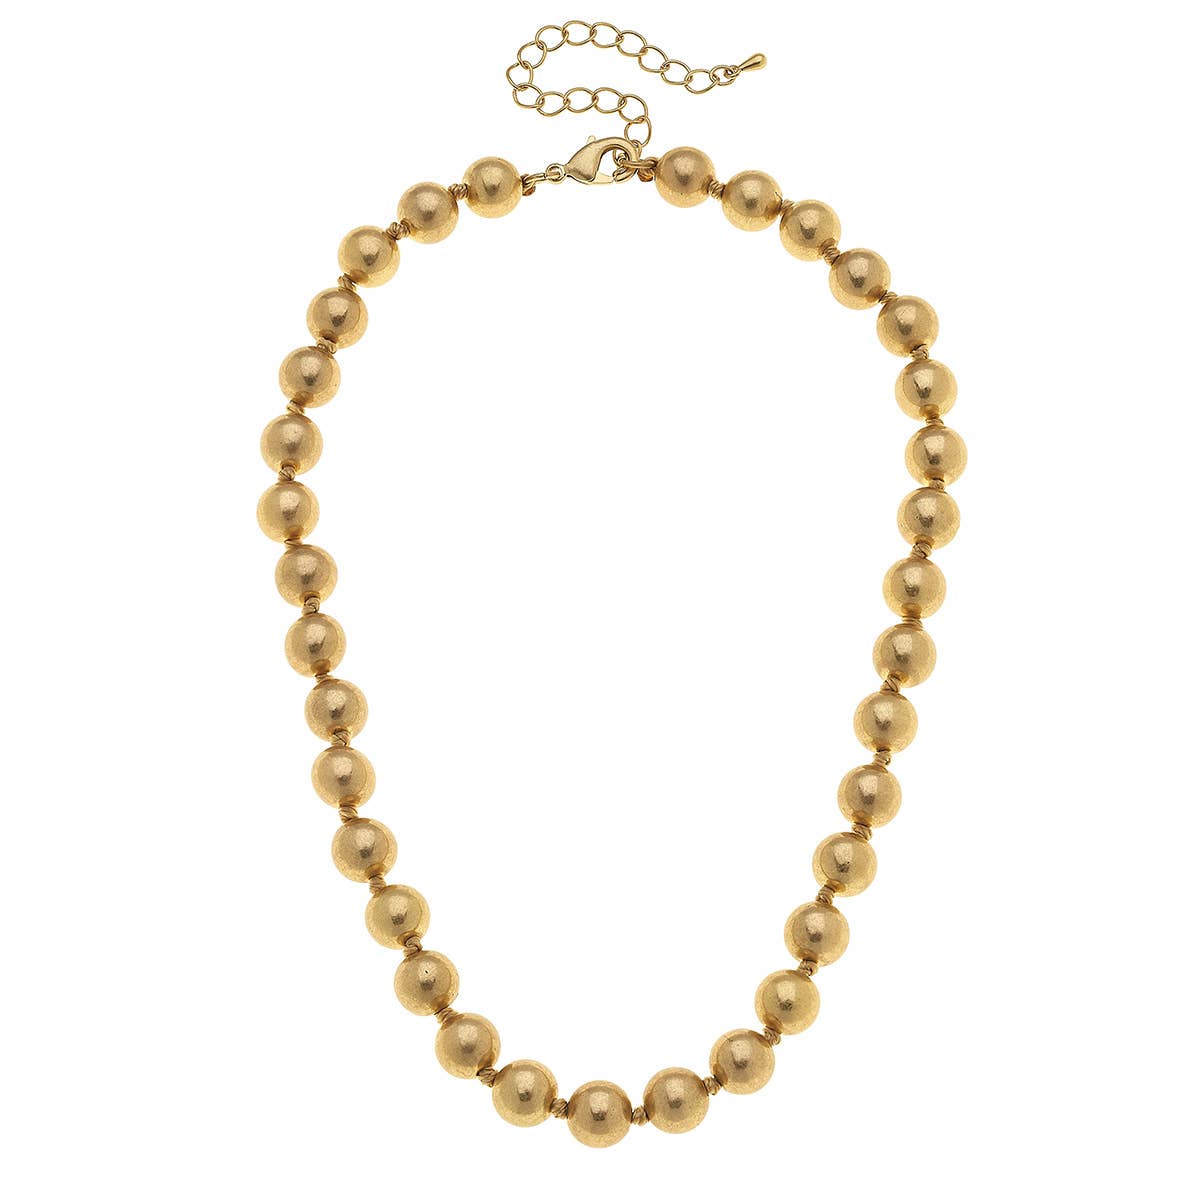 Chloe 10MM Hand-Knotted Ball Bead Necklace in Worn Gold